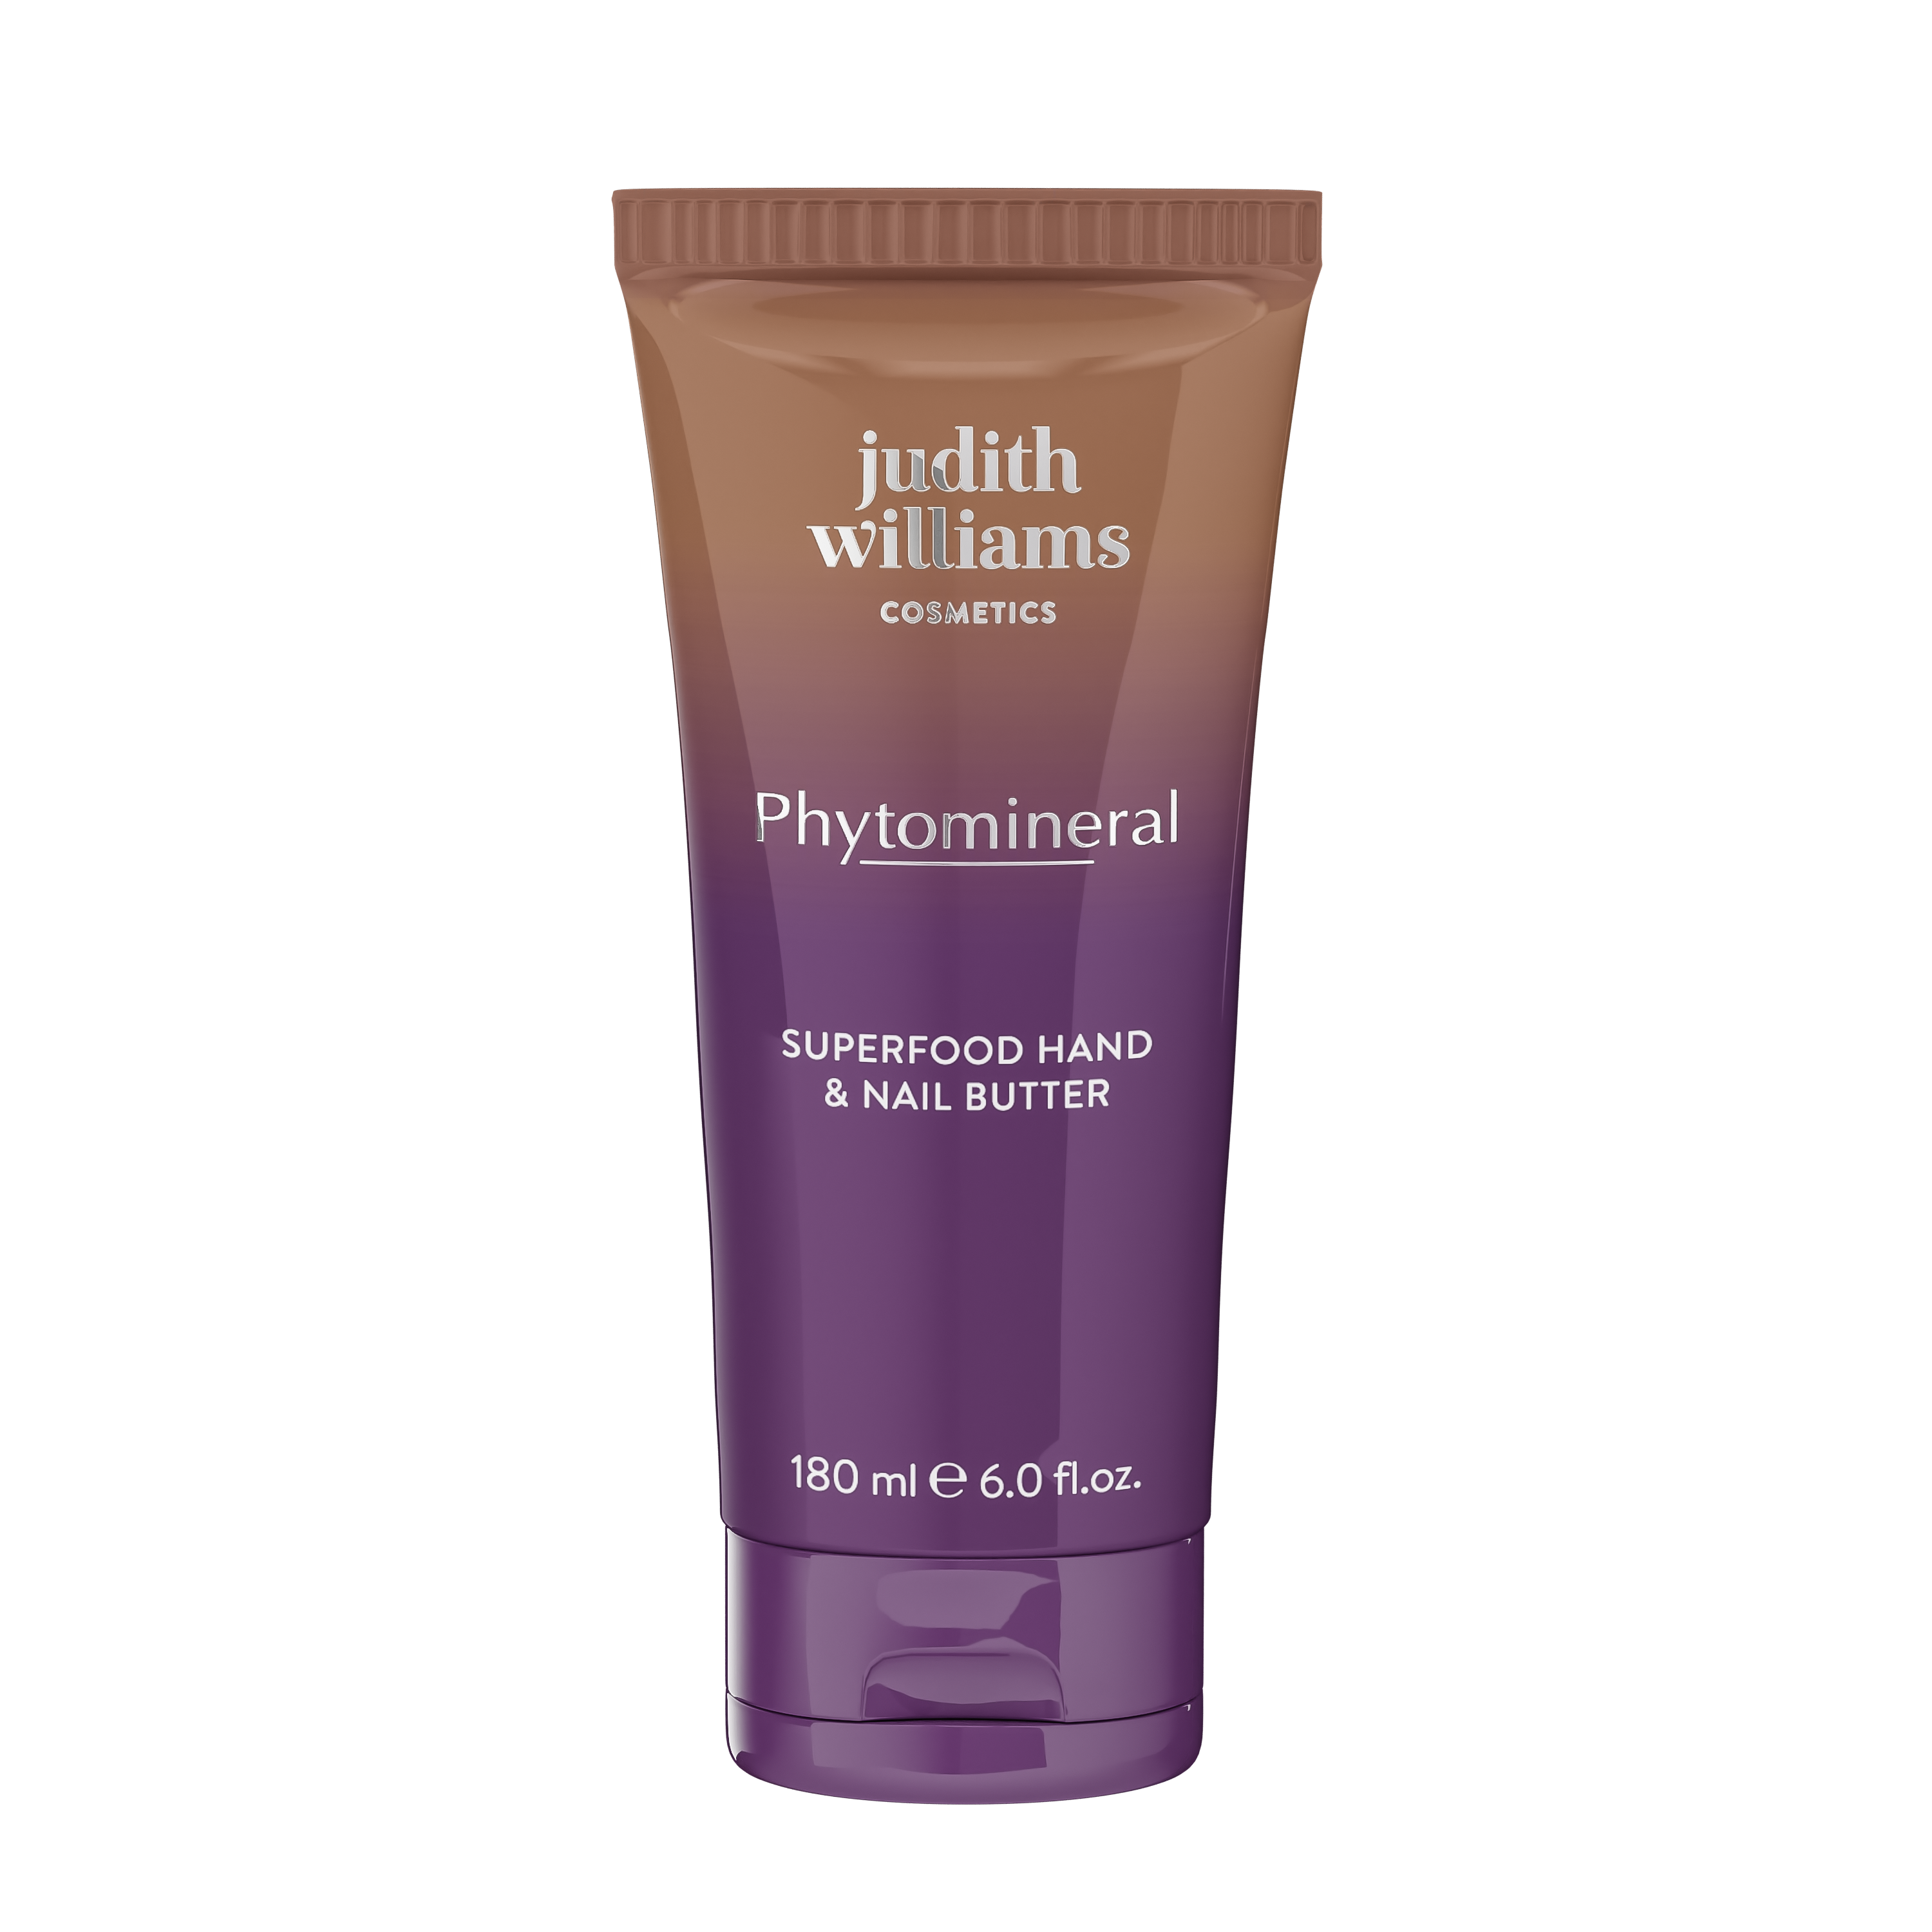 Handcreme | Phytomineral | Superfood Hand & Nail Butter | Judith Williams